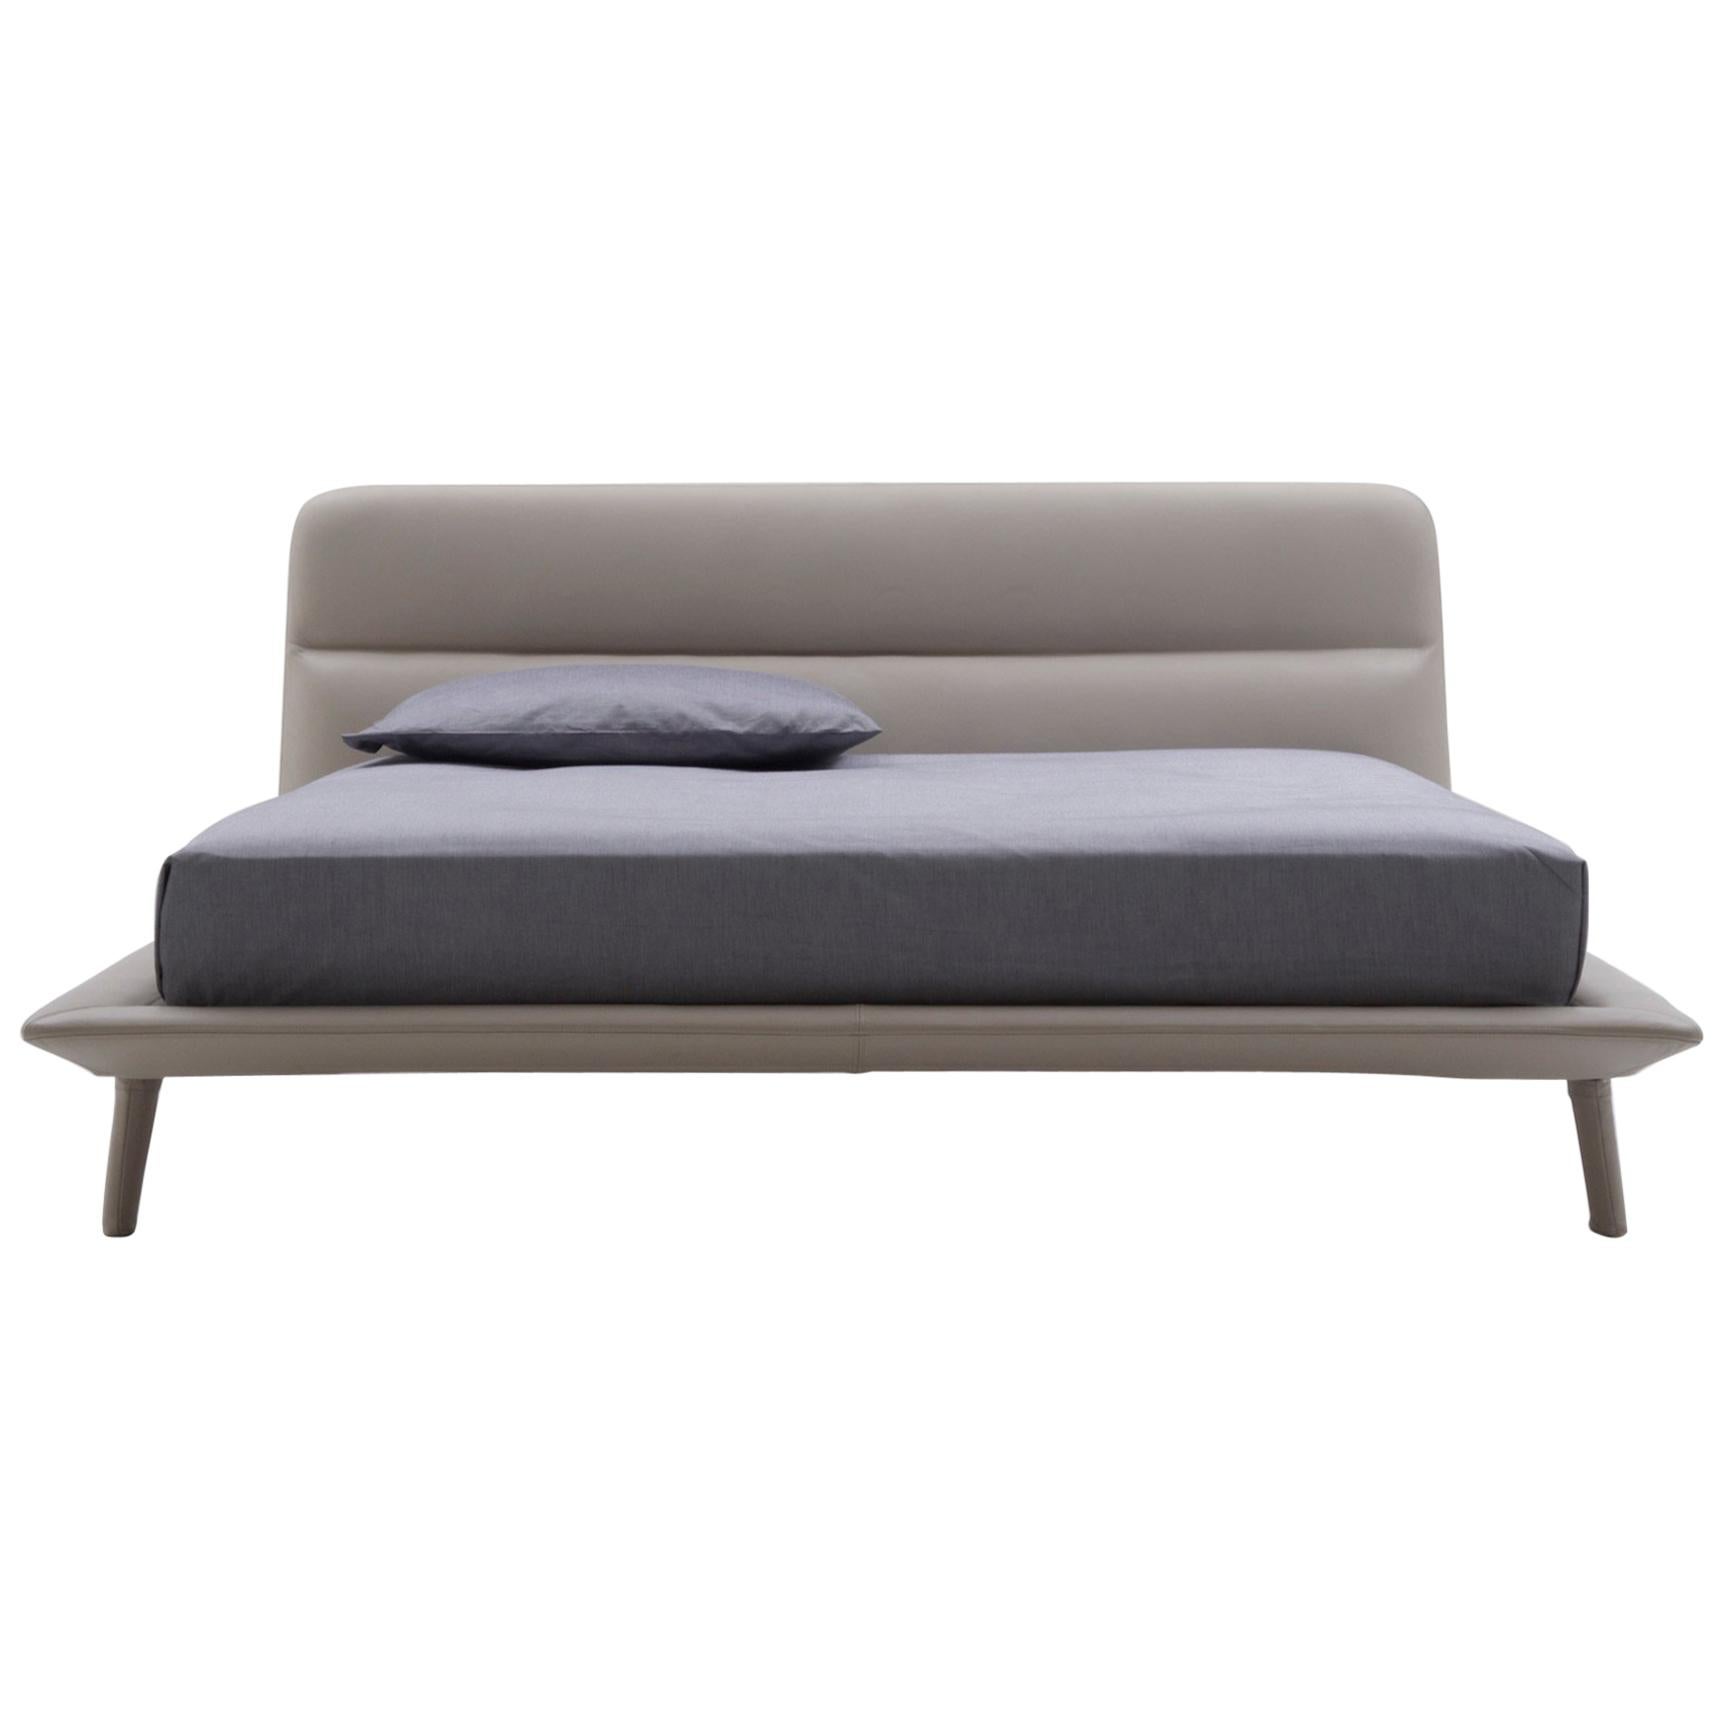 Nube Italia Amos Bed in Taupe and Gray Fabric by Mario Ferrarini